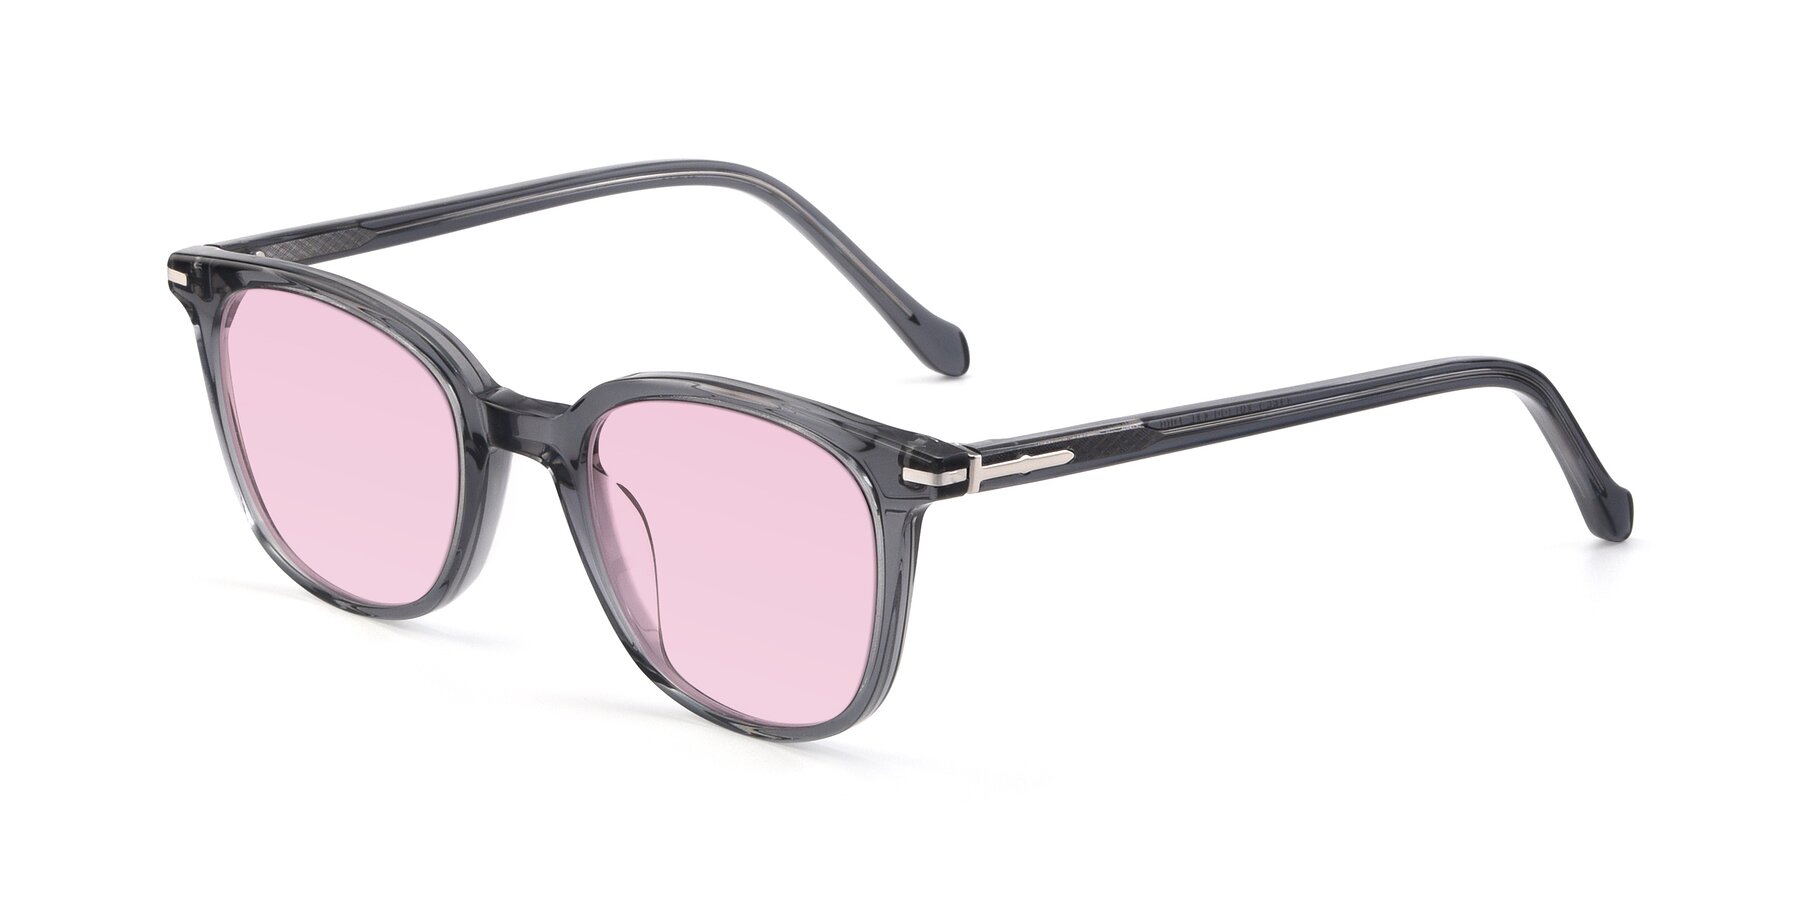 Angle of 17562 in Transparent Grey with Light Pink Tinted Lenses